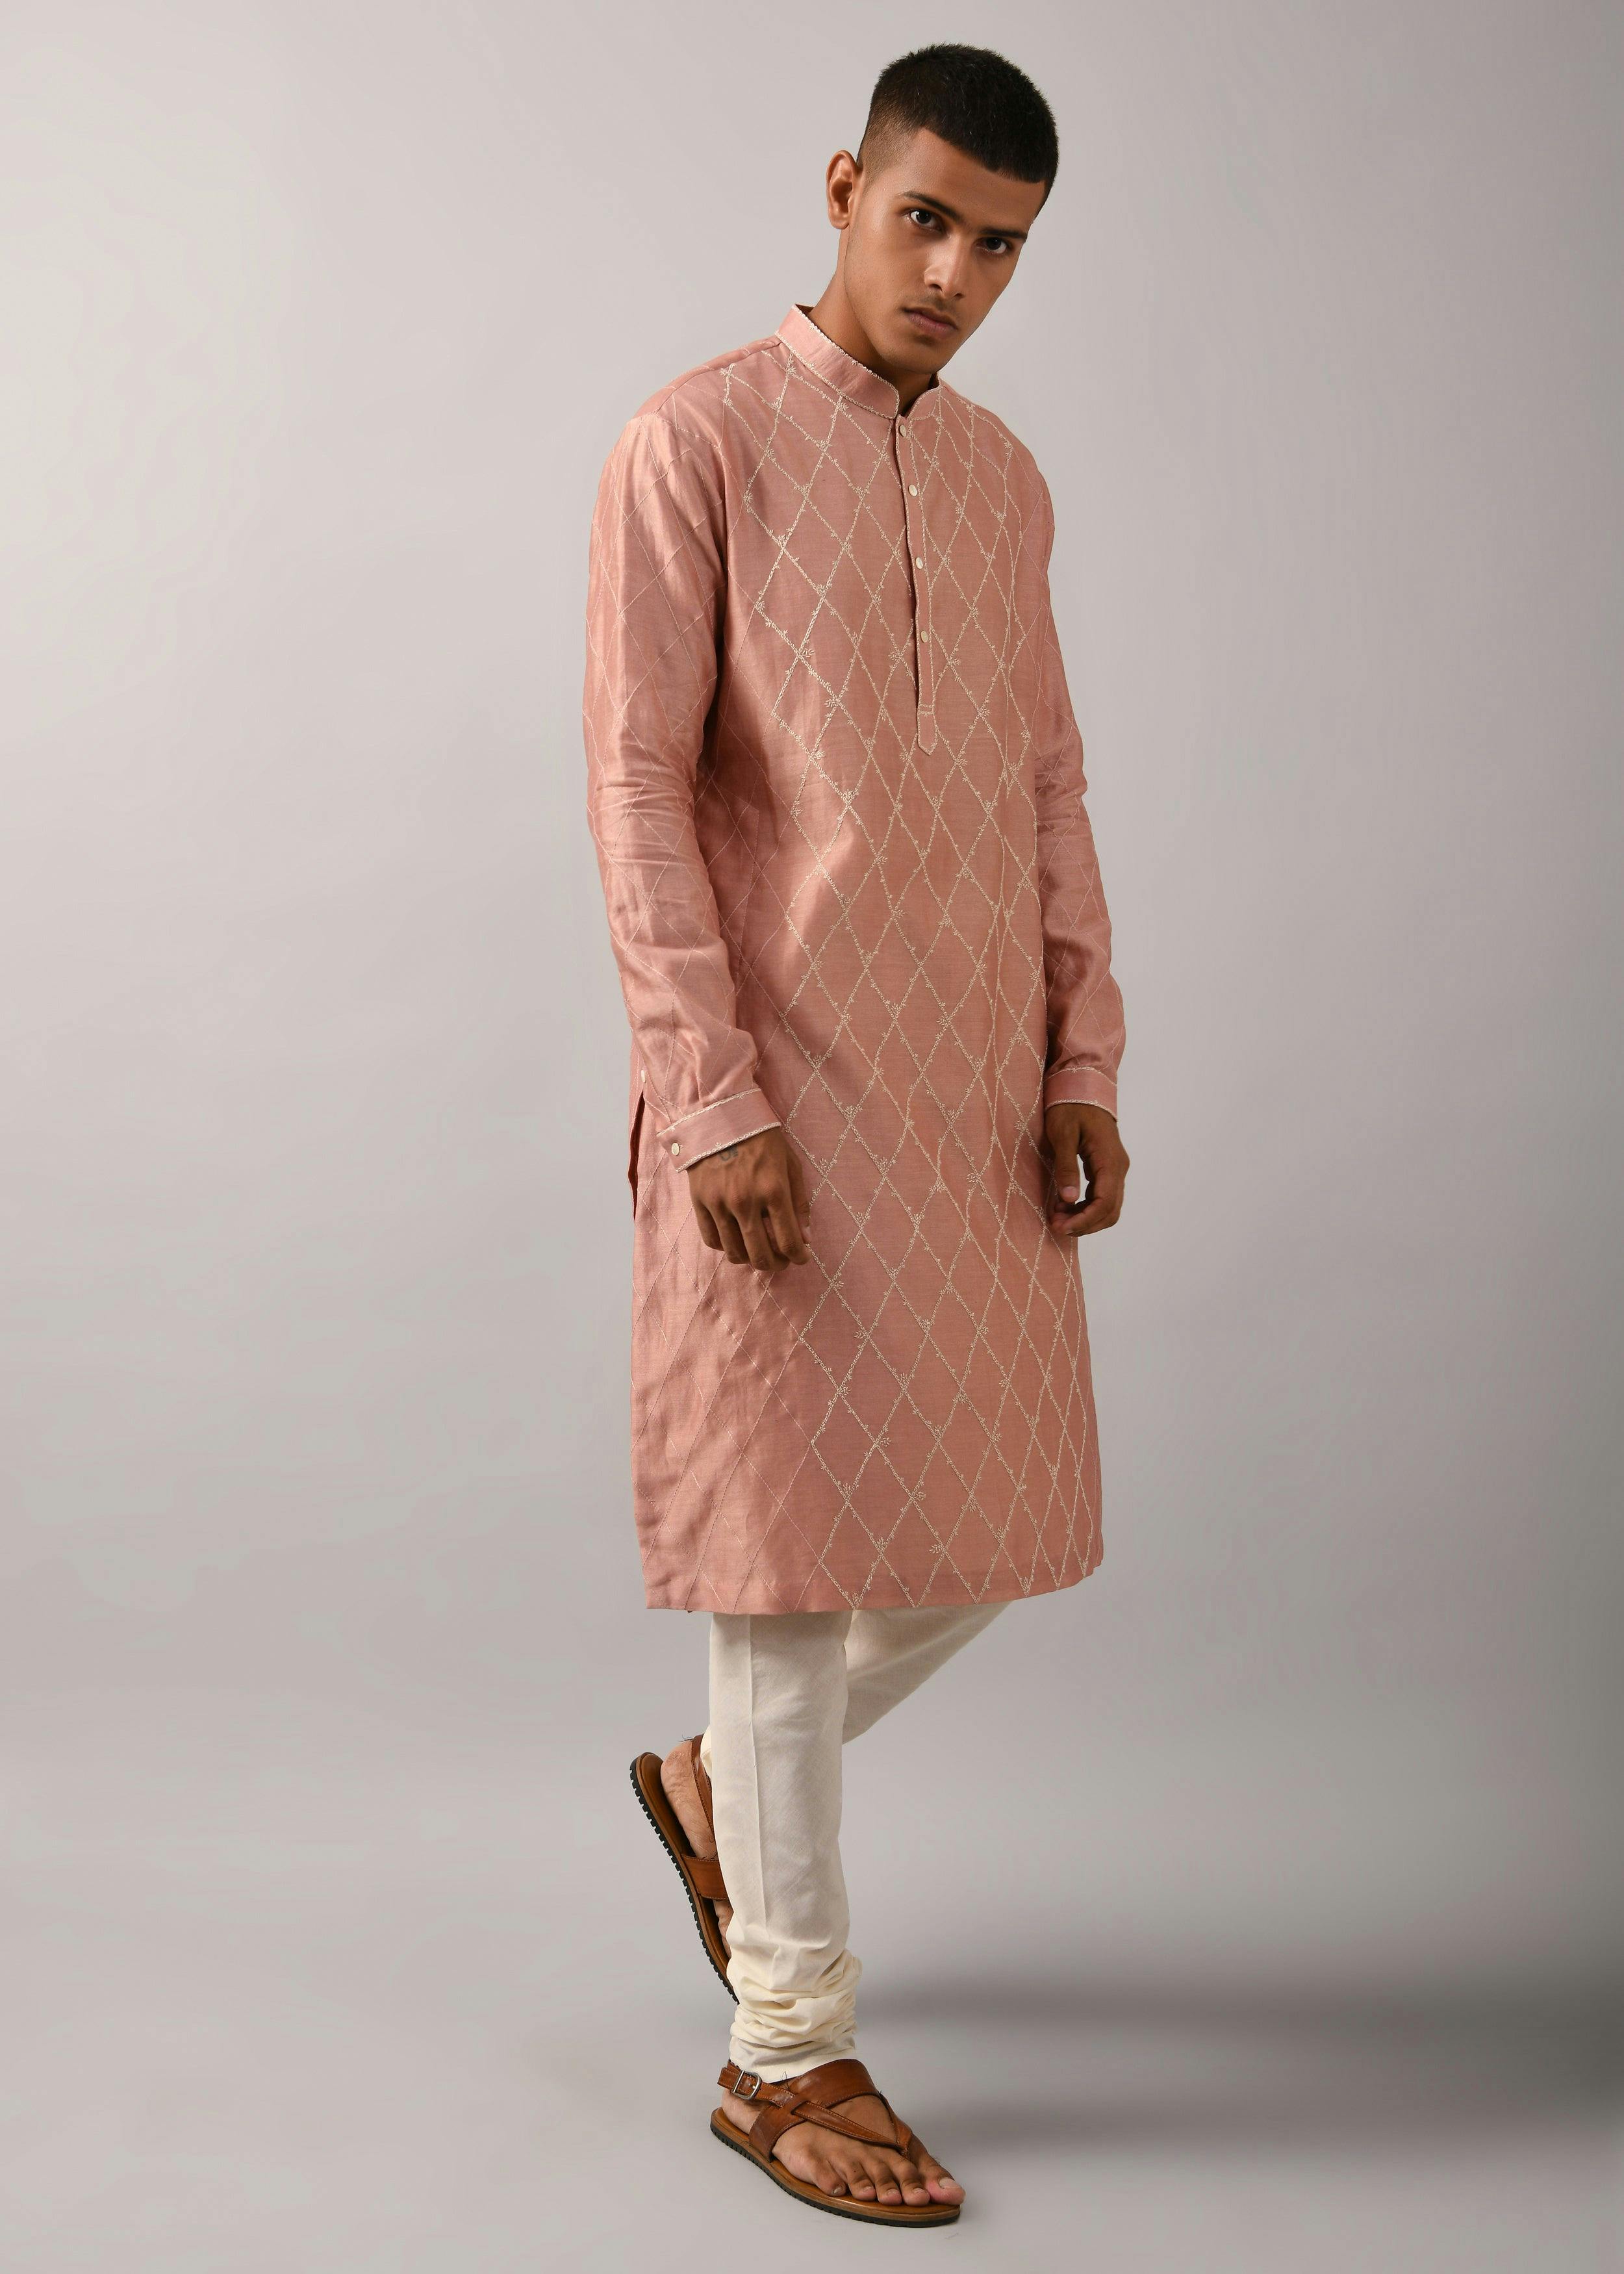 Diamond Pattern Embroidered Kurta Set, a product by Country Made